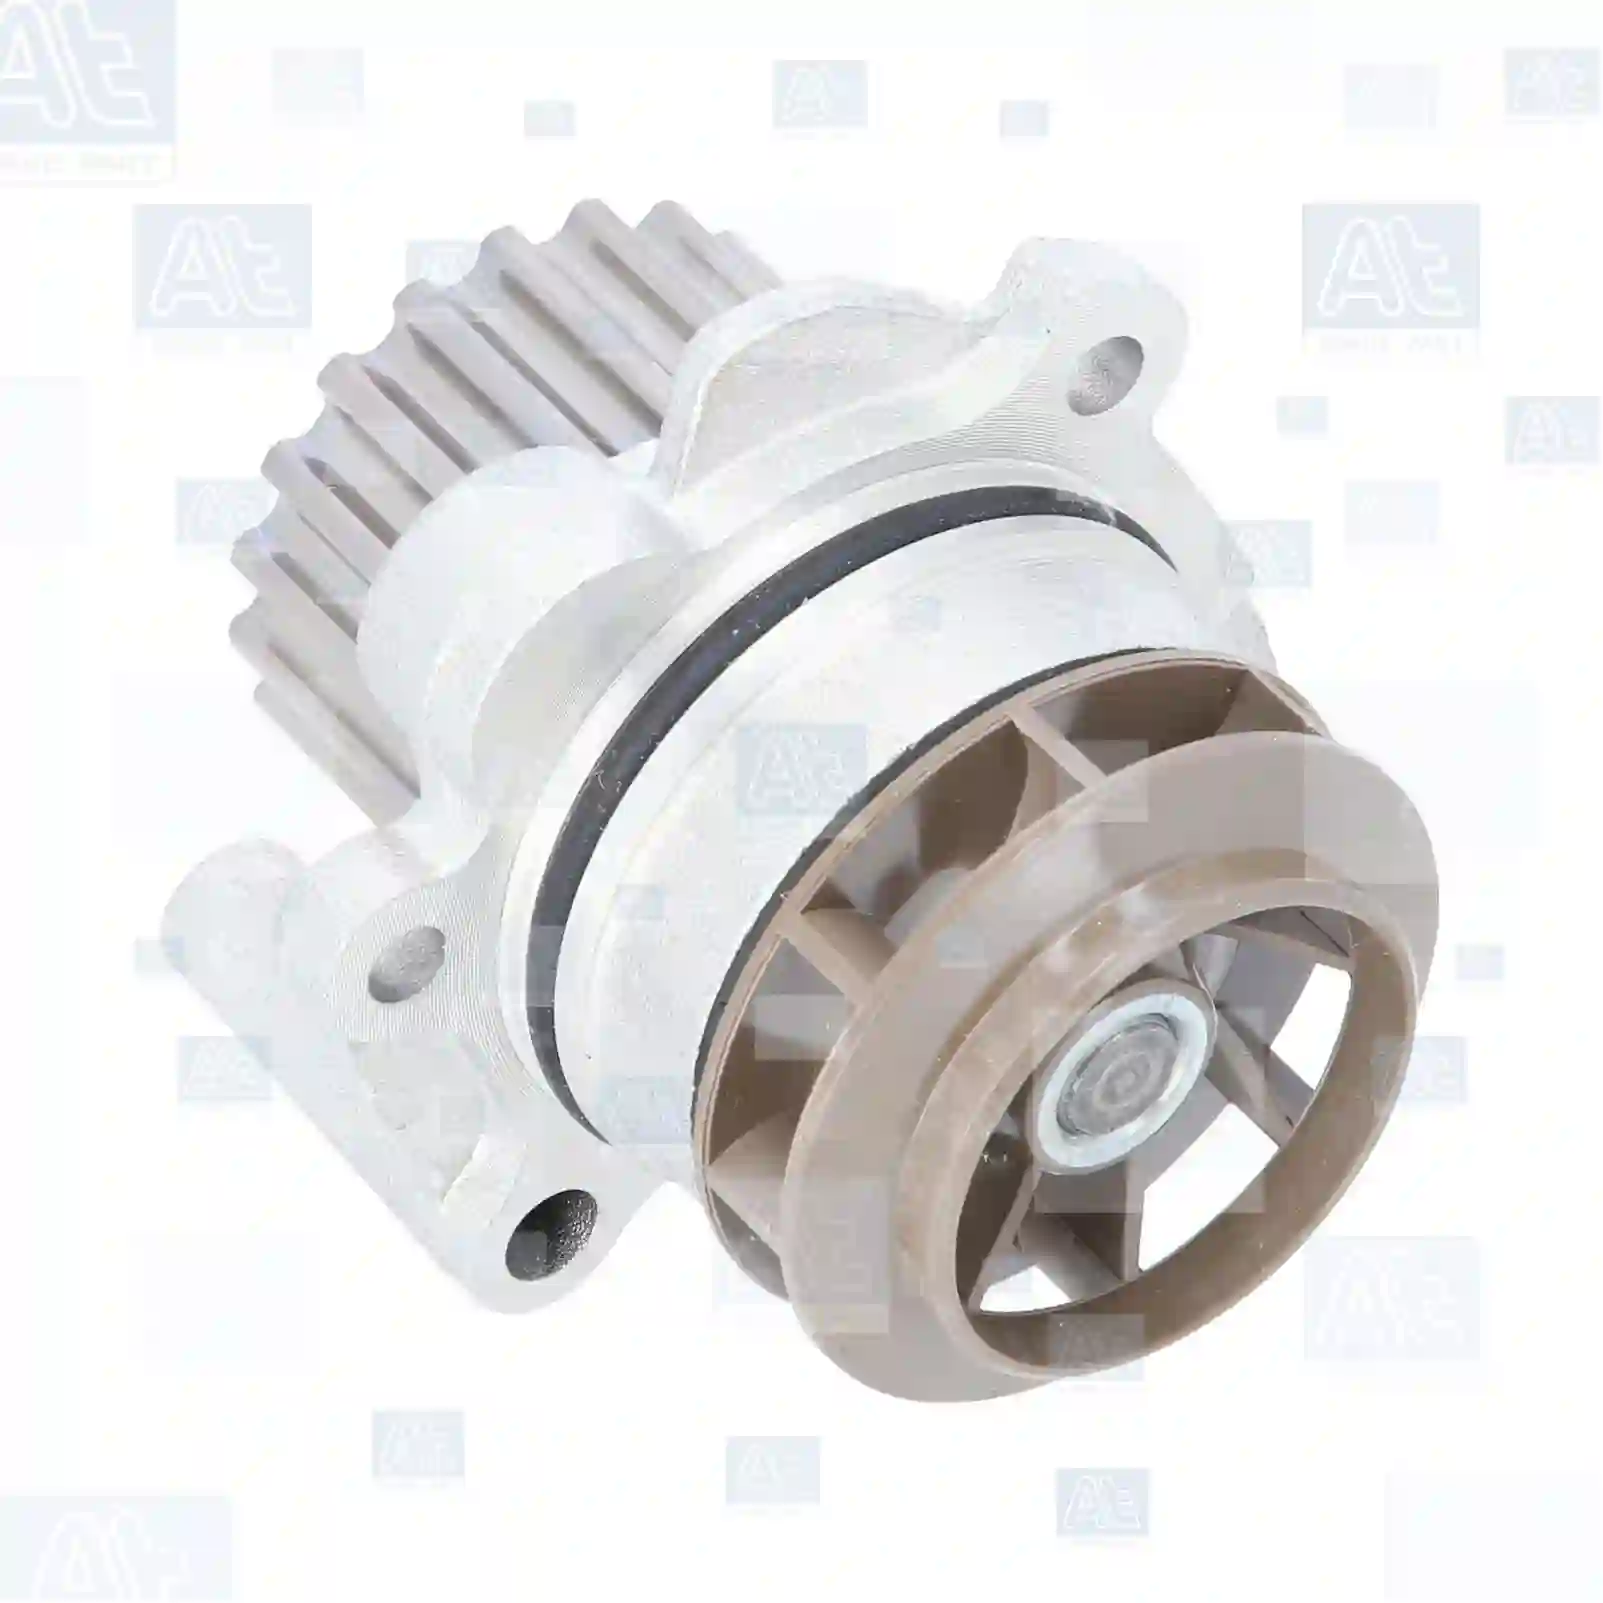 Water pump, at no 77707435, oem no: 03L121011, 03L121011E, 03L121011H, 03L121011J, 03L121011P, PA10148, 68000693AA, 68000693AB, K68000693AA, 1612725580, 68000693AA, 68000693AB, K68000693AA, 68000693AA, 68000693AB, K68000693AA, MN980134, MN980266, 1612725580, 03L121011, 03L121011E, 03L121011H, 03L121011J, 03L121011P, 03L121011, 03L121011E, 03L121011H, 03L121011J, 03L121011P, 03L121011, 03L121011C, 03L121011CV, 03L121011CX, 03L121011E, 03L121011F, 03L121011H, 03L121011HV, 03L121011HX, 03L121011J, 03L121011JV, 03L121011JX, 03L121011N, 03L121011NX, 03L121011P, 03L121011PX, 03L121011V, 03L121011X, 3L121011JX At Spare Part | Engine, Accelerator Pedal, Camshaft, Connecting Rod, Crankcase, Crankshaft, Cylinder Head, Engine Suspension Mountings, Exhaust Manifold, Exhaust Gas Recirculation, Filter Kits, Flywheel Housing, General Overhaul Kits, Engine, Intake Manifold, Oil Cleaner, Oil Cooler, Oil Filter, Oil Pump, Oil Sump, Piston & Liner, Sensor & Switch, Timing Case, Turbocharger, Cooling System, Belt Tensioner, Coolant Filter, Coolant Pipe, Corrosion Prevention Agent, Drive, Expansion Tank, Fan, Intercooler, Monitors & Gauges, Radiator, Thermostat, V-Belt / Timing belt, Water Pump, Fuel System, Electronical Injector Unit, Feed Pump, Fuel Filter, cpl., Fuel Gauge Sender,  Fuel Line, Fuel Pump, Fuel Tank, Injection Line Kit, Injection Pump, Exhaust System, Clutch & Pedal, Gearbox, Propeller Shaft, Axles, Brake System, Hubs & Wheels, Suspension, Leaf Spring, Universal Parts / Accessories, Steering, Electrical System, Cabin Water pump, at no 77707435, oem no: 03L121011, 03L121011E, 03L121011H, 03L121011J, 03L121011P, PA10148, 68000693AA, 68000693AB, K68000693AA, 1612725580, 68000693AA, 68000693AB, K68000693AA, 68000693AA, 68000693AB, K68000693AA, MN980134, MN980266, 1612725580, 03L121011, 03L121011E, 03L121011H, 03L121011J, 03L121011P, 03L121011, 03L121011E, 03L121011H, 03L121011J, 03L121011P, 03L121011, 03L121011C, 03L121011CV, 03L121011CX, 03L121011E, 03L121011F, 03L121011H, 03L121011HV, 03L121011HX, 03L121011J, 03L121011JV, 03L121011JX, 03L121011N, 03L121011NX, 03L121011P, 03L121011PX, 03L121011V, 03L121011X, 3L121011JX At Spare Part | Engine, Accelerator Pedal, Camshaft, Connecting Rod, Crankcase, Crankshaft, Cylinder Head, Engine Suspension Mountings, Exhaust Manifold, Exhaust Gas Recirculation, Filter Kits, Flywheel Housing, General Overhaul Kits, Engine, Intake Manifold, Oil Cleaner, Oil Cooler, Oil Filter, Oil Pump, Oil Sump, Piston & Liner, Sensor & Switch, Timing Case, Turbocharger, Cooling System, Belt Tensioner, Coolant Filter, Coolant Pipe, Corrosion Prevention Agent, Drive, Expansion Tank, Fan, Intercooler, Monitors & Gauges, Radiator, Thermostat, V-Belt / Timing belt, Water Pump, Fuel System, Electronical Injector Unit, Feed Pump, Fuel Filter, cpl., Fuel Gauge Sender,  Fuel Line, Fuel Pump, Fuel Tank, Injection Line Kit, Injection Pump, Exhaust System, Clutch & Pedal, Gearbox, Propeller Shaft, Axles, Brake System, Hubs & Wheels, Suspension, Leaf Spring, Universal Parts / Accessories, Steering, Electrical System, Cabin